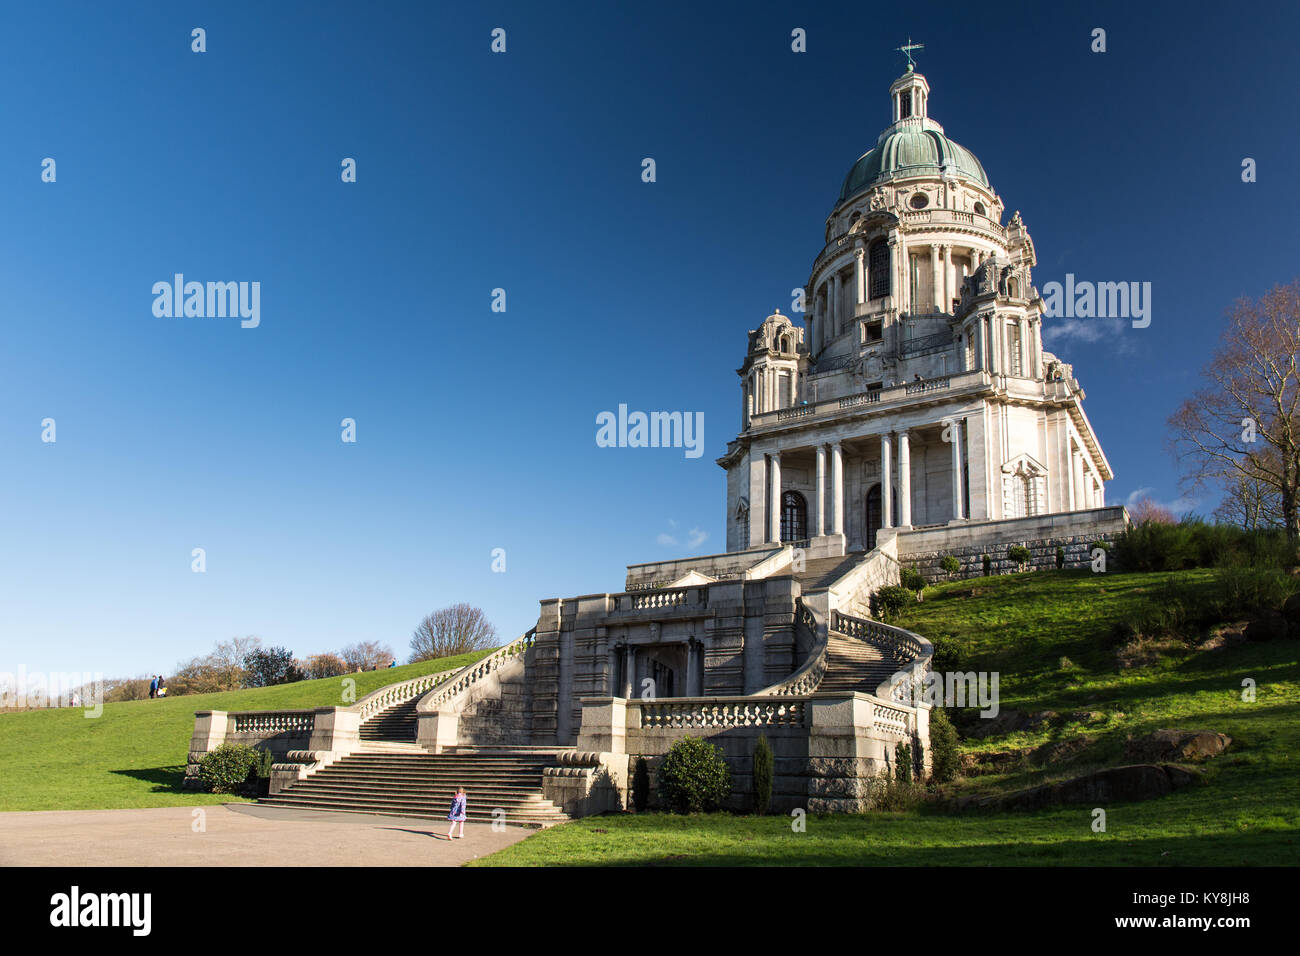 Lancaster, England, UK - November 12, 2017: Sunshine lights up the Portland Stone structure of the Ashton Memorial, a large Baroque folly in Williamso Stock Photo